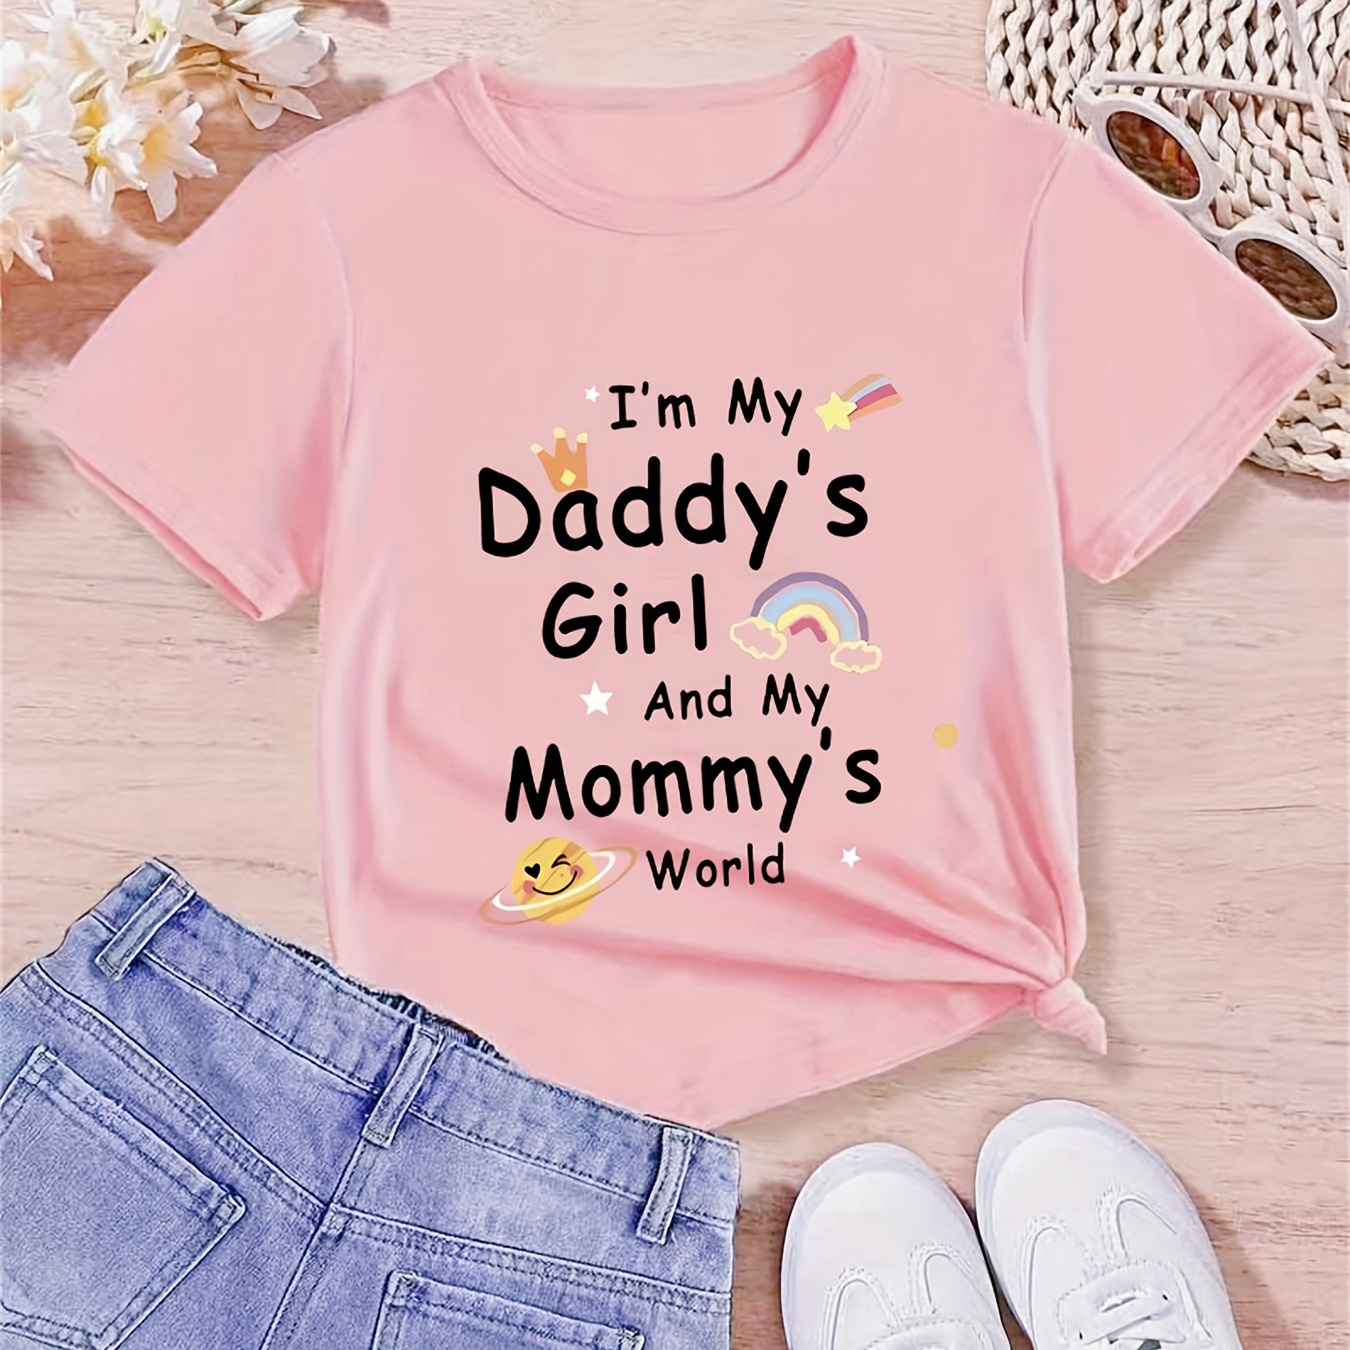 

i'm My Daddy's Girl And My Mommy's World" Print Creative T-shirts, Soft & Elastic Comfy Crew Neck Short Sleeve Tee, Girls' Summer Tops